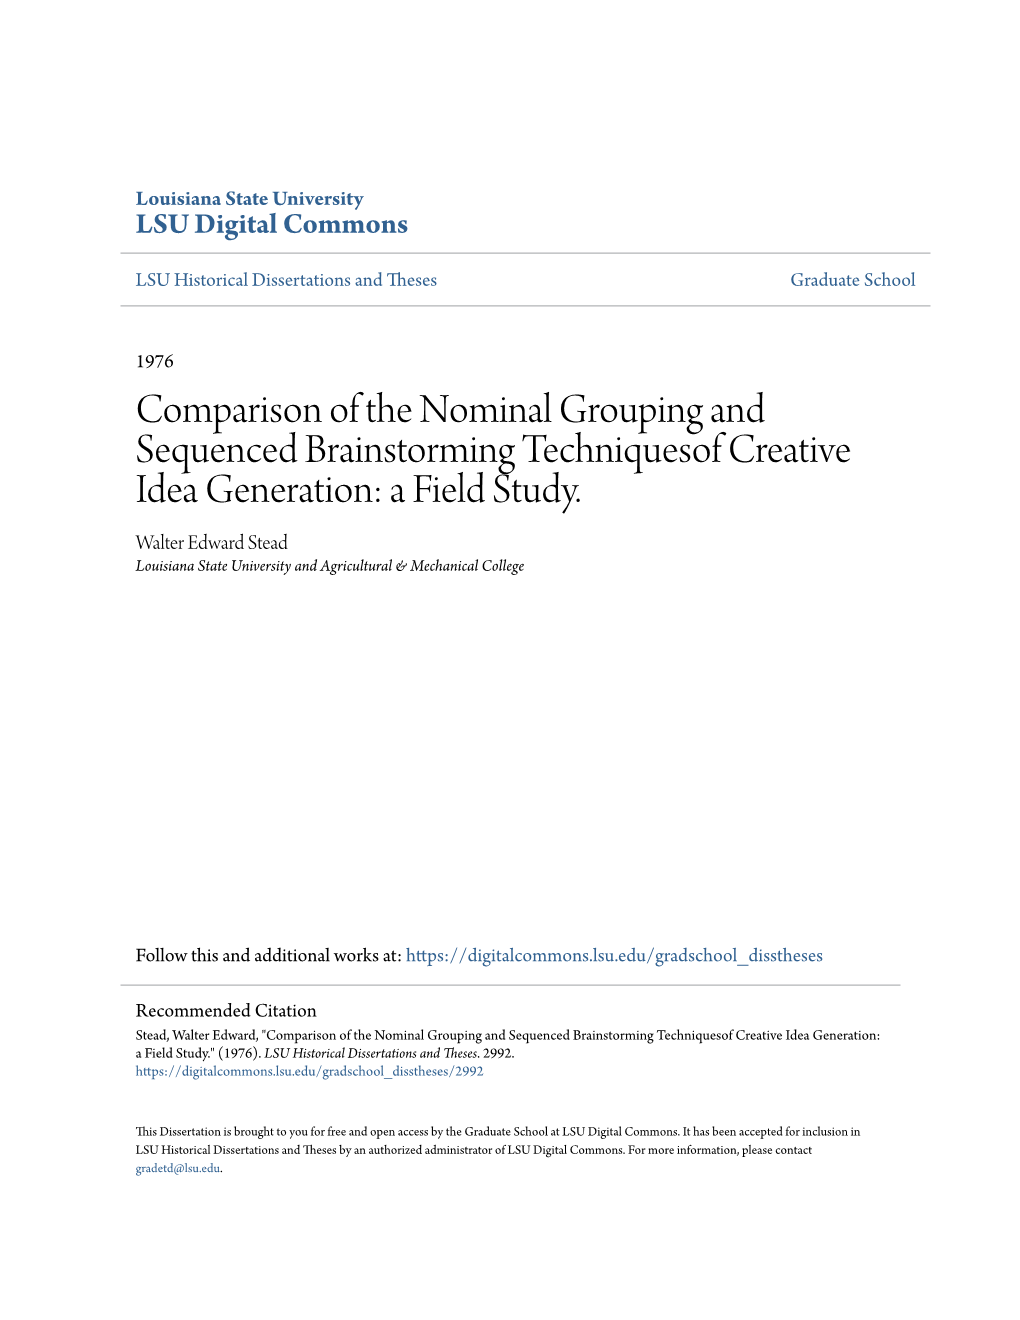 Comparison of the Nominal Grouping and Sequenced Brainstorming Techniquesof Creative Idea Generation: a Field Study